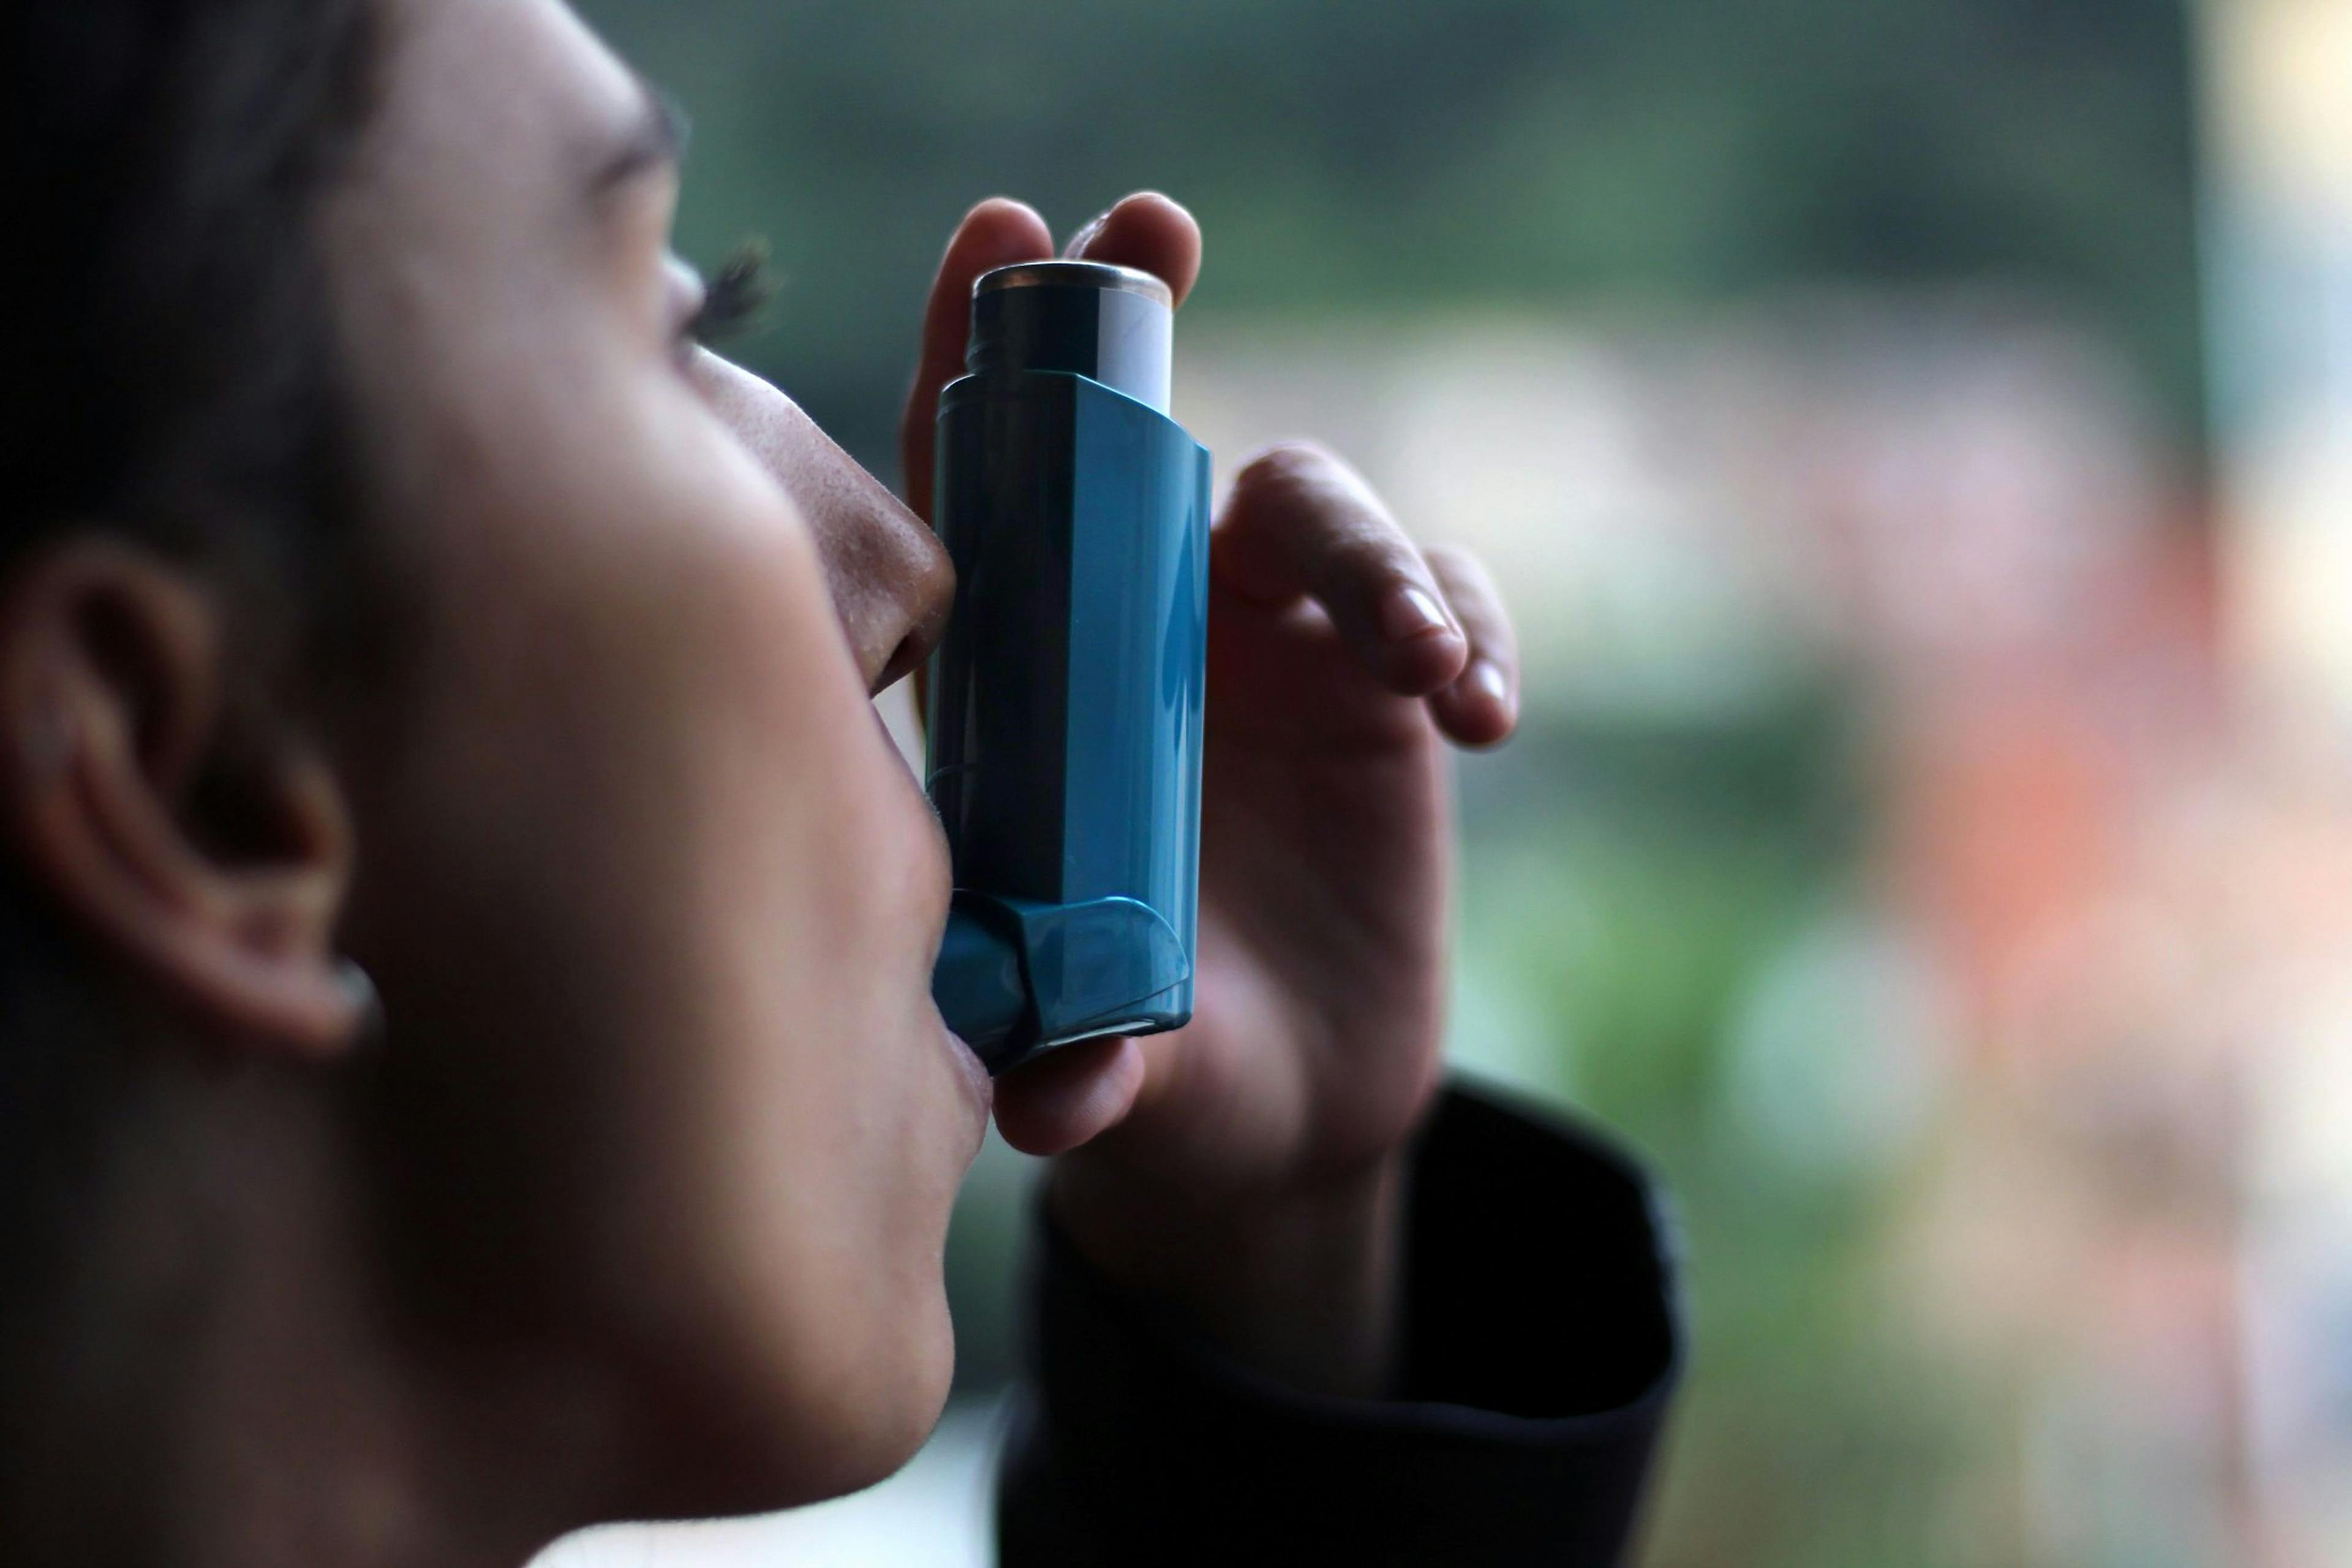 Health and medicine - Young girl using blue asthma inhaler to prevent an asthma attack | Image credit: DALU11 - stock.adobe.com